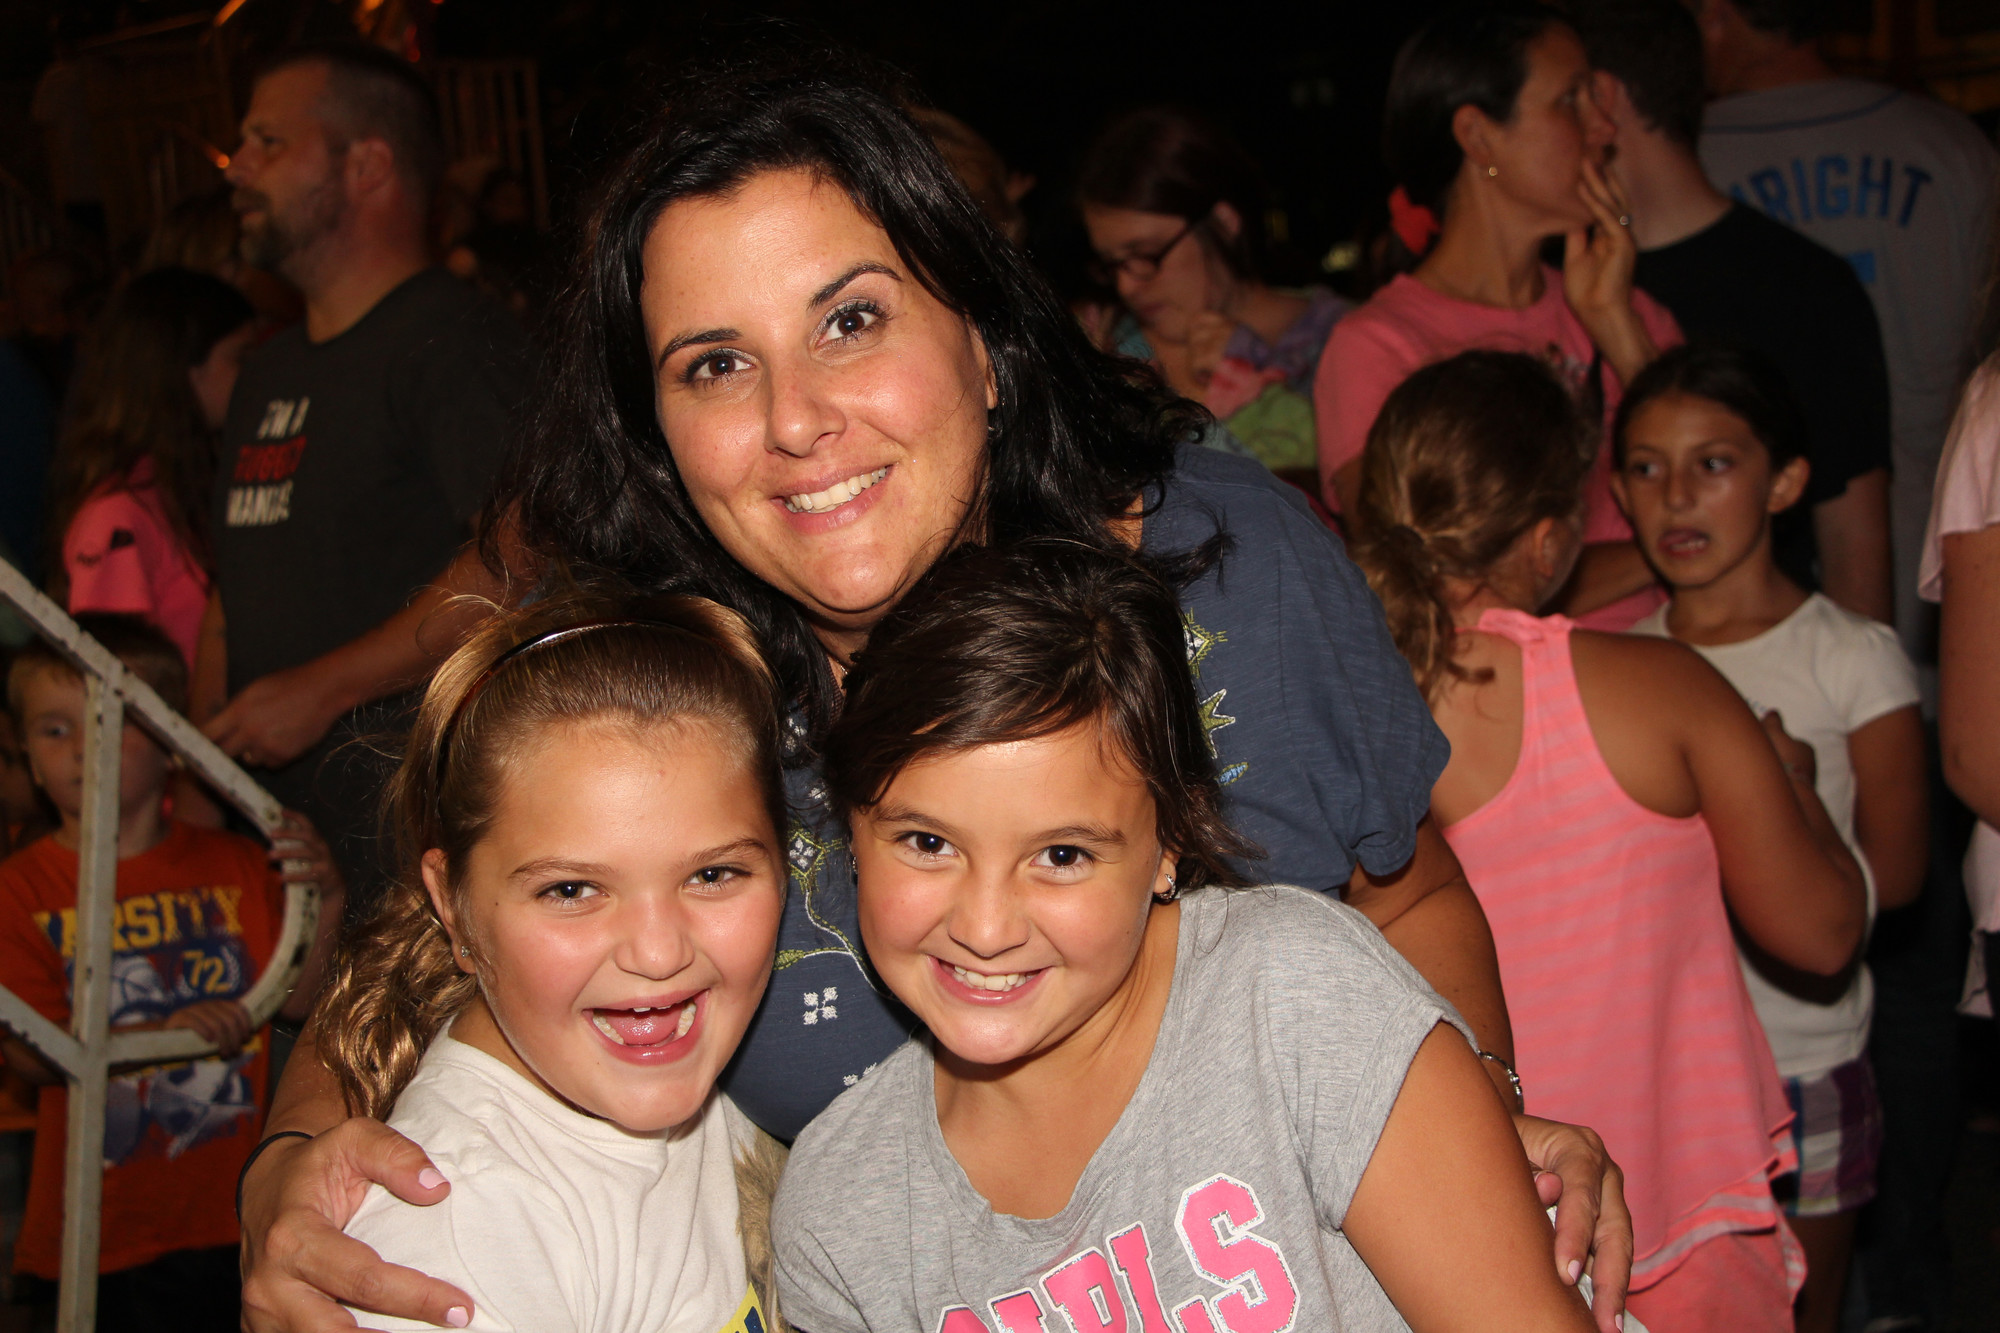 Natalie Harrison, 8, and her mother Christina with their friend Julia Agro, also 8, were all the smiles at the festival.